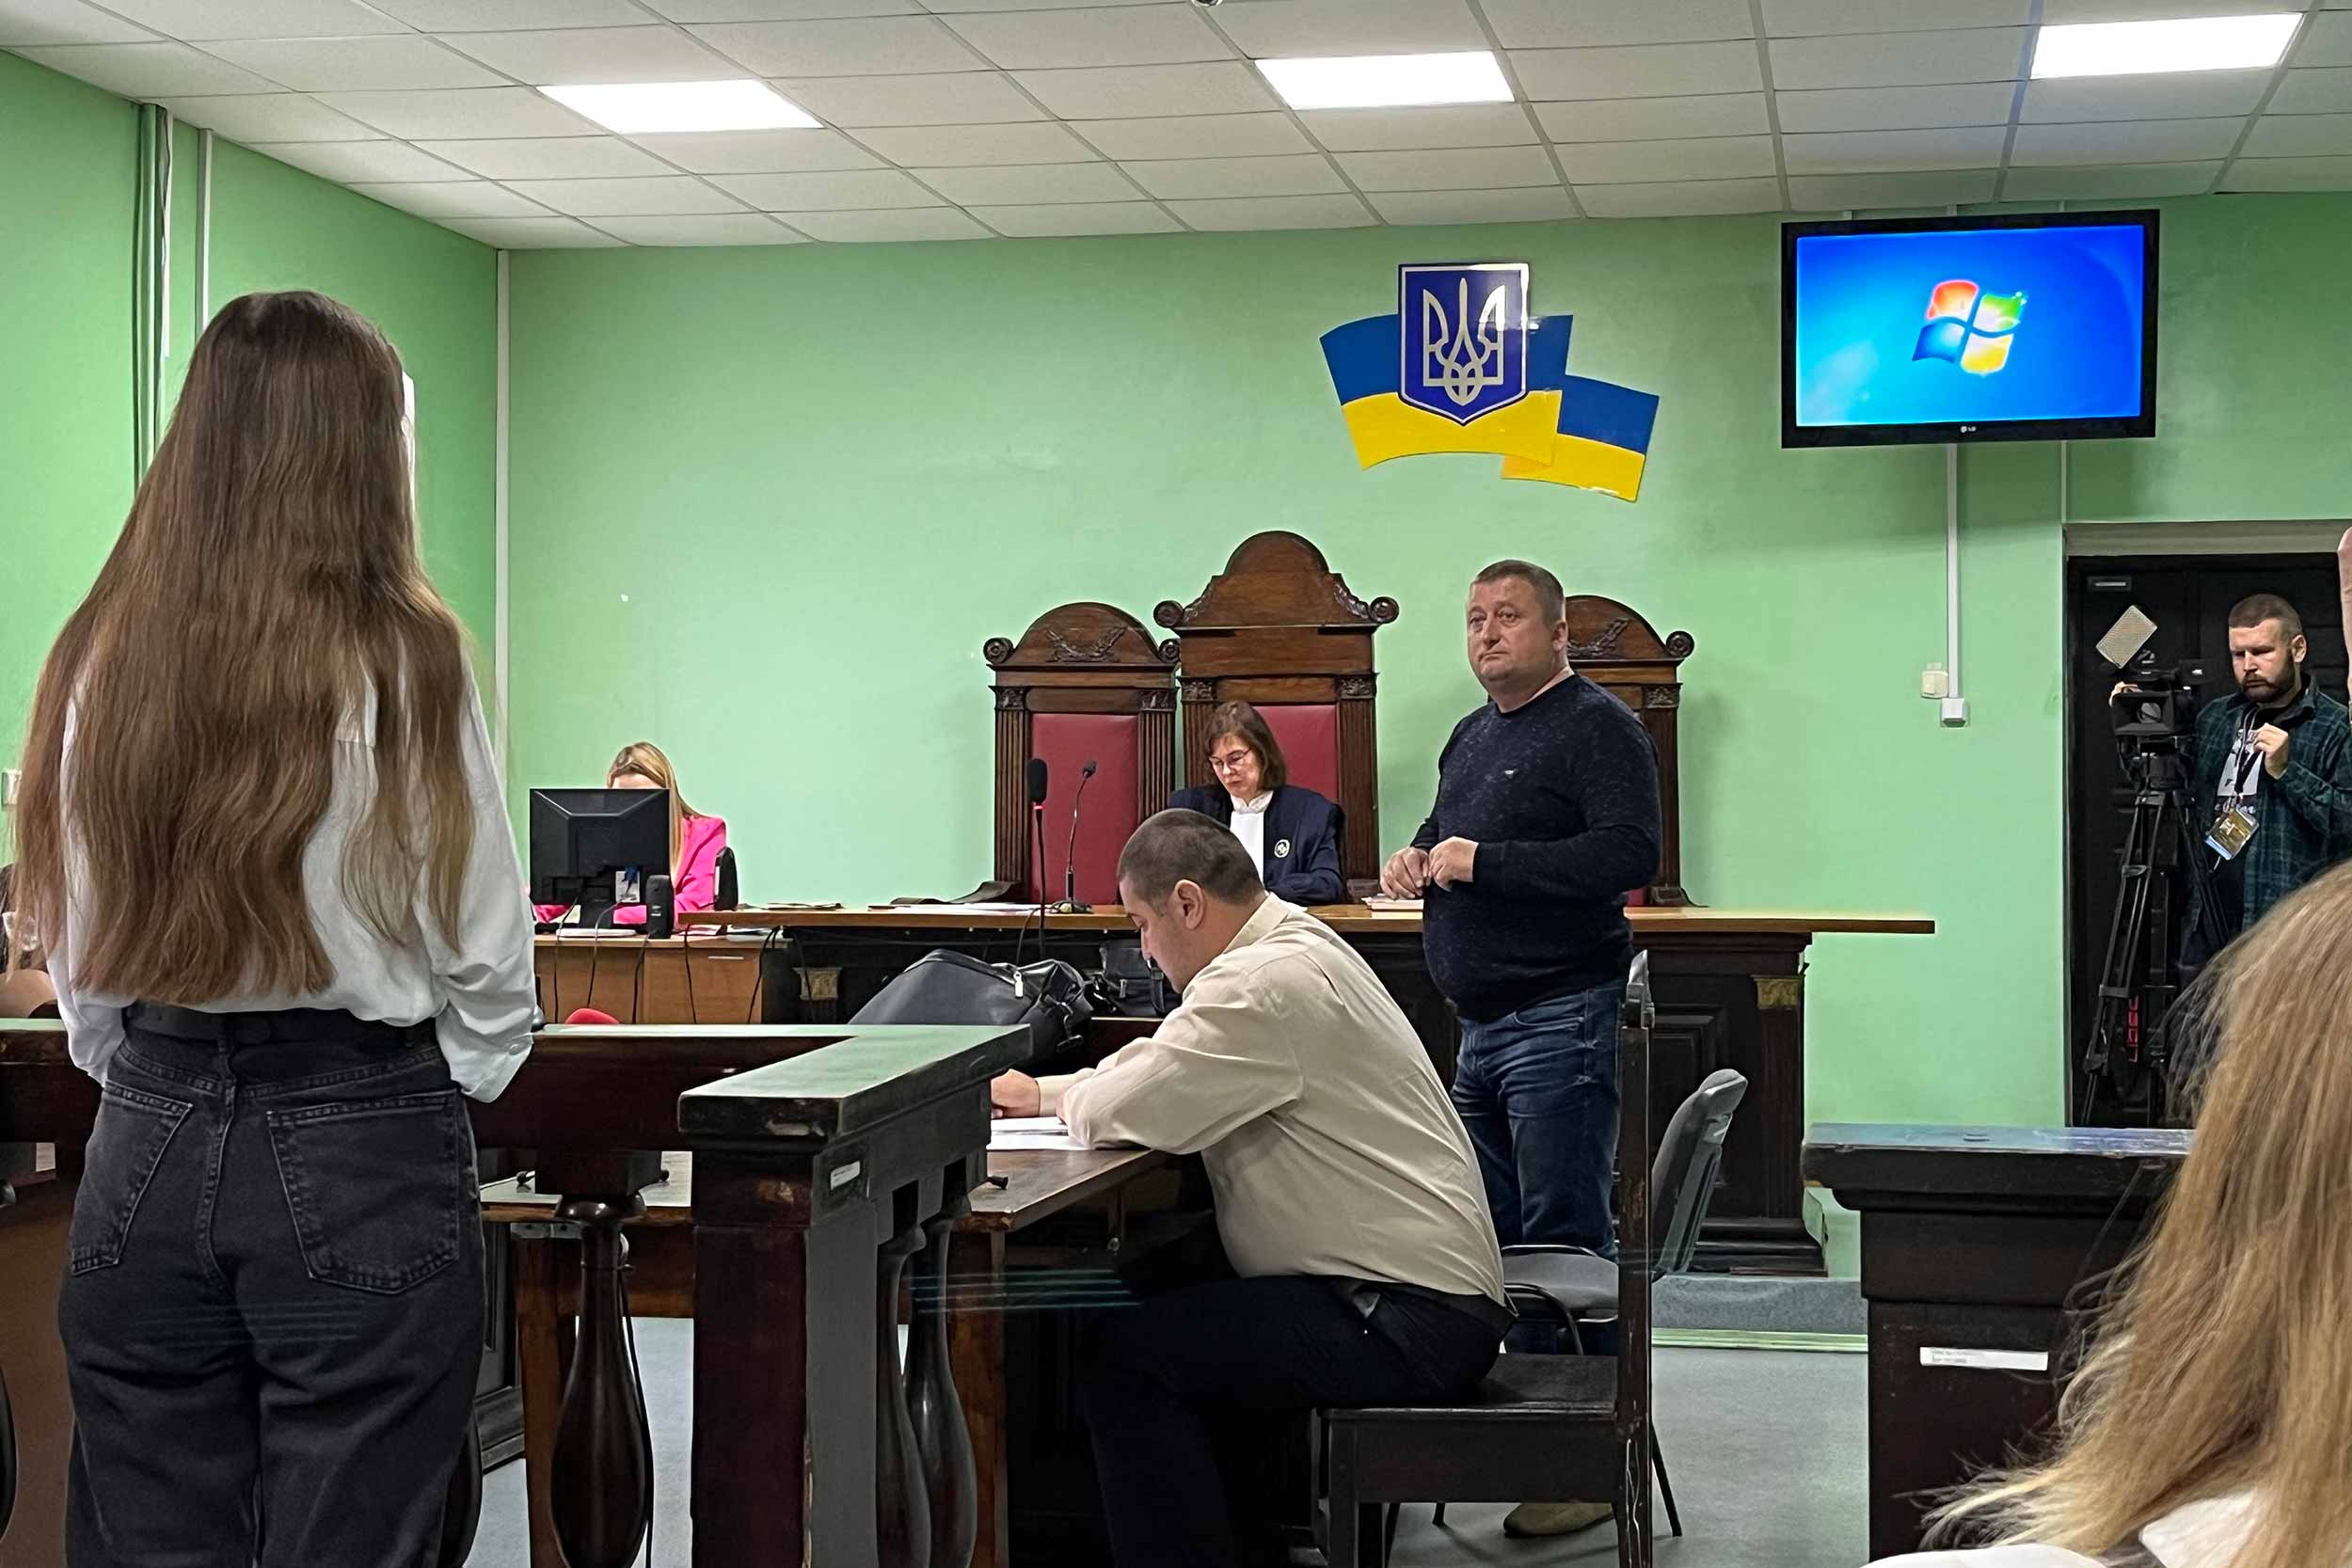 The Chernihiv District Court during a hearing of the case of the village of Yahidne. © Irina Domashchenko, Sept 2023